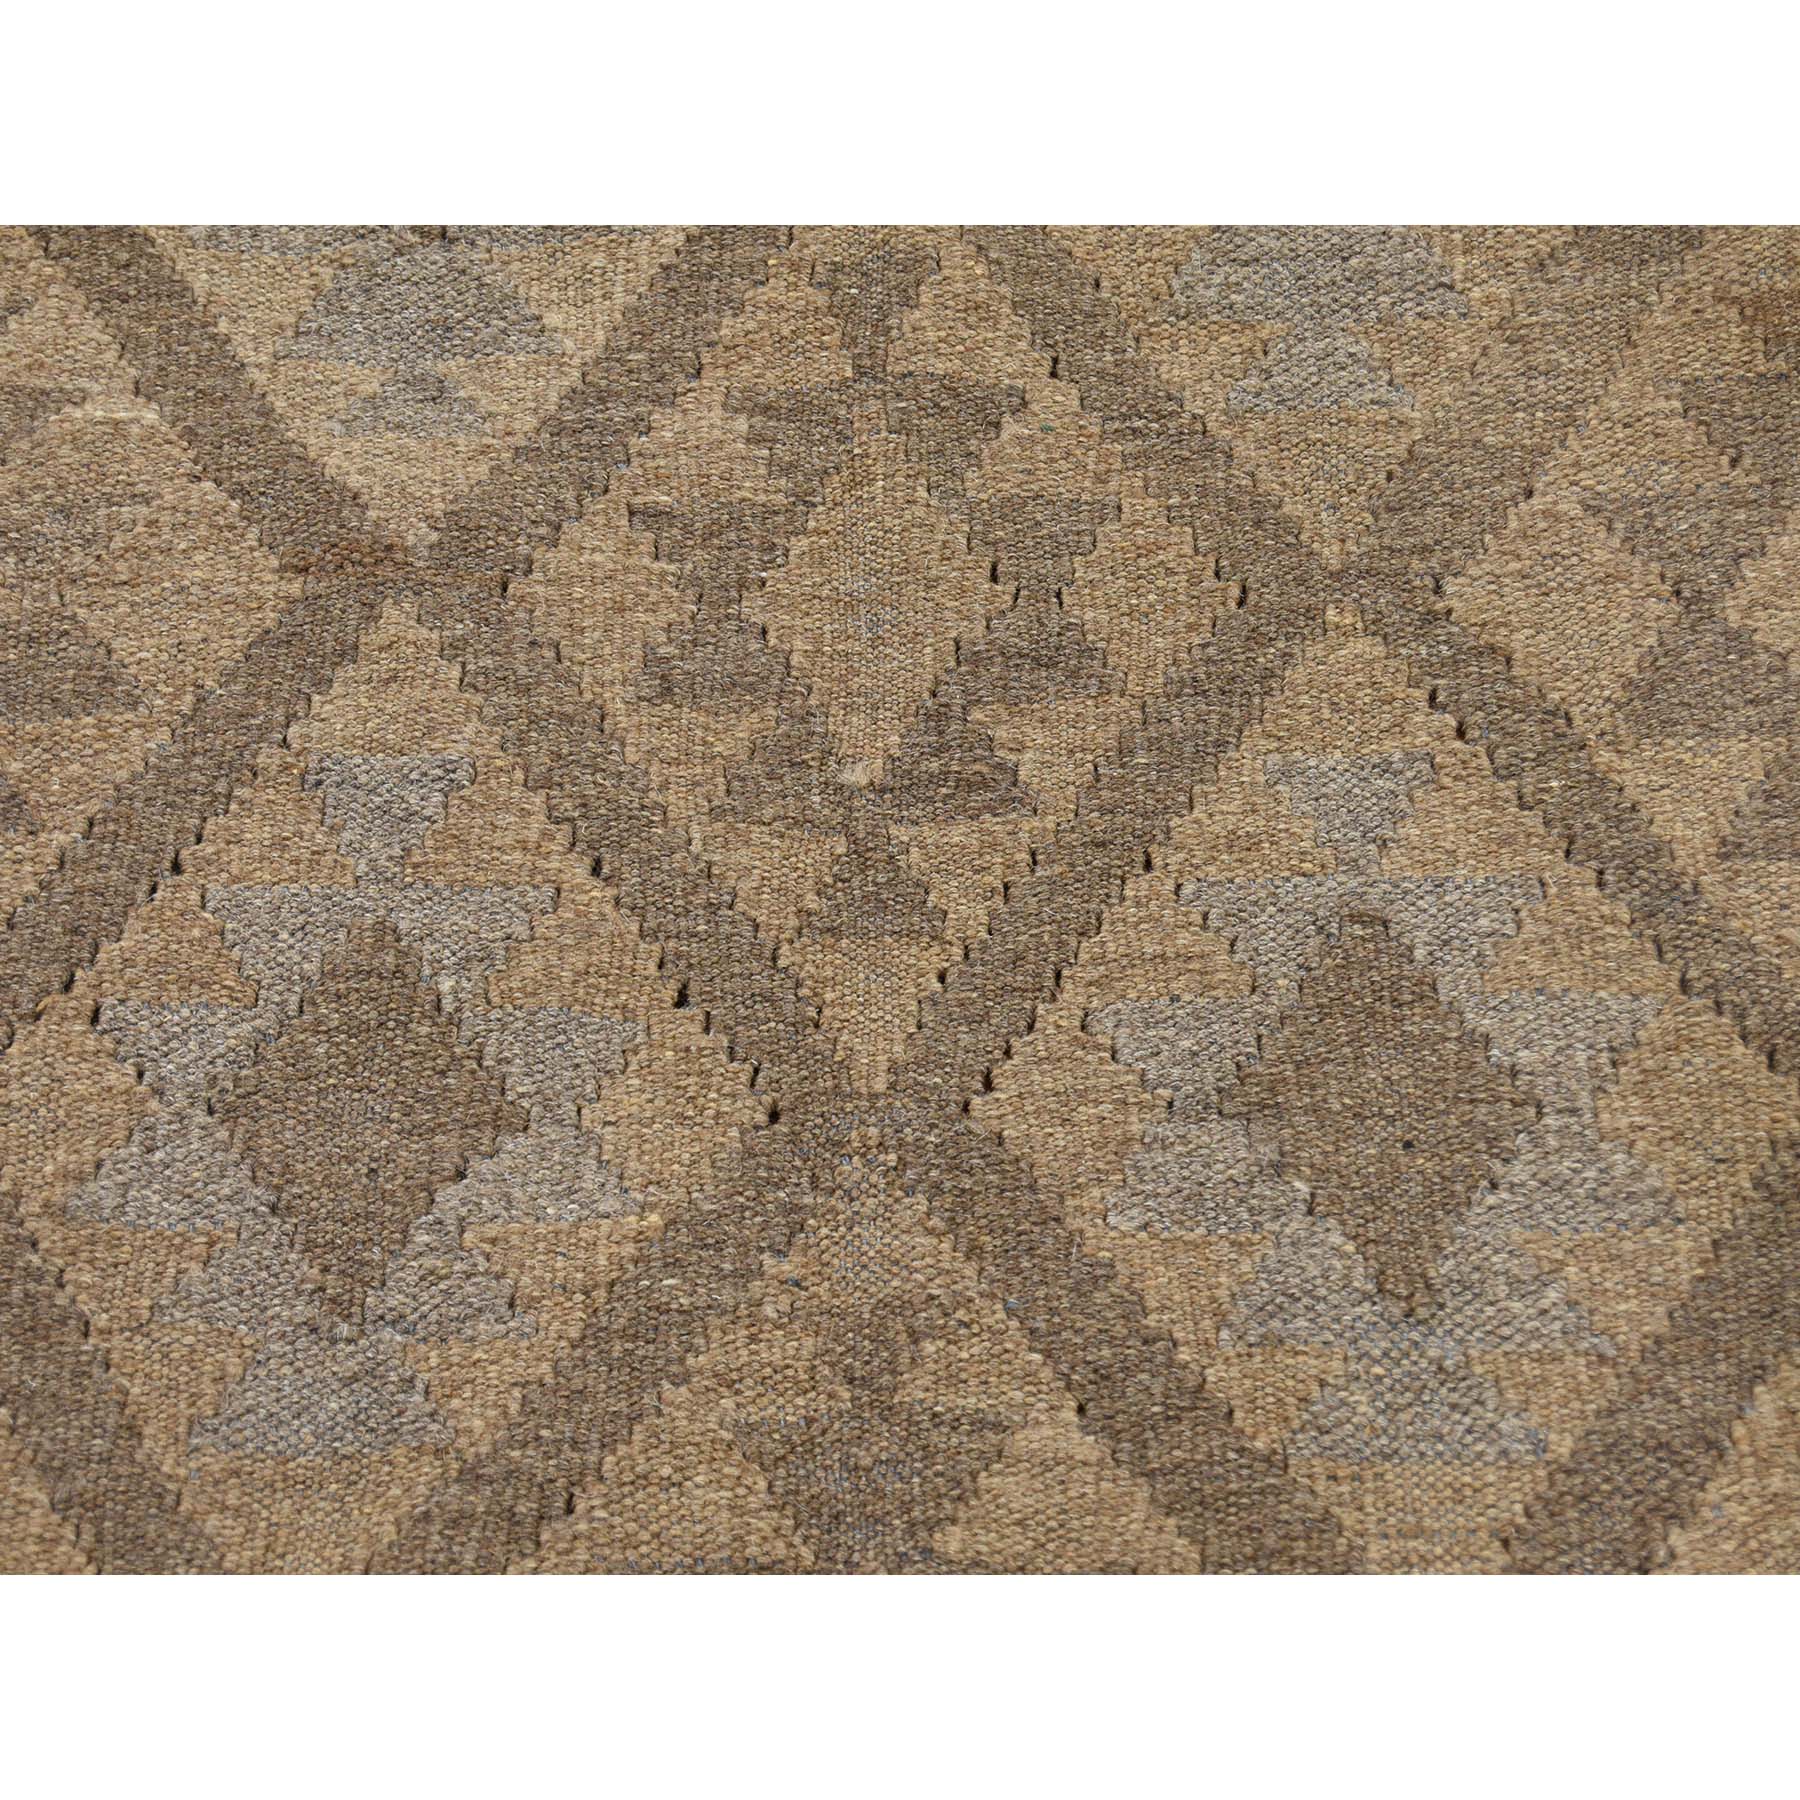 4-x6- Afghan Kilim Reversible Undyed Natural Wool Hand Woven Oriental Rug 